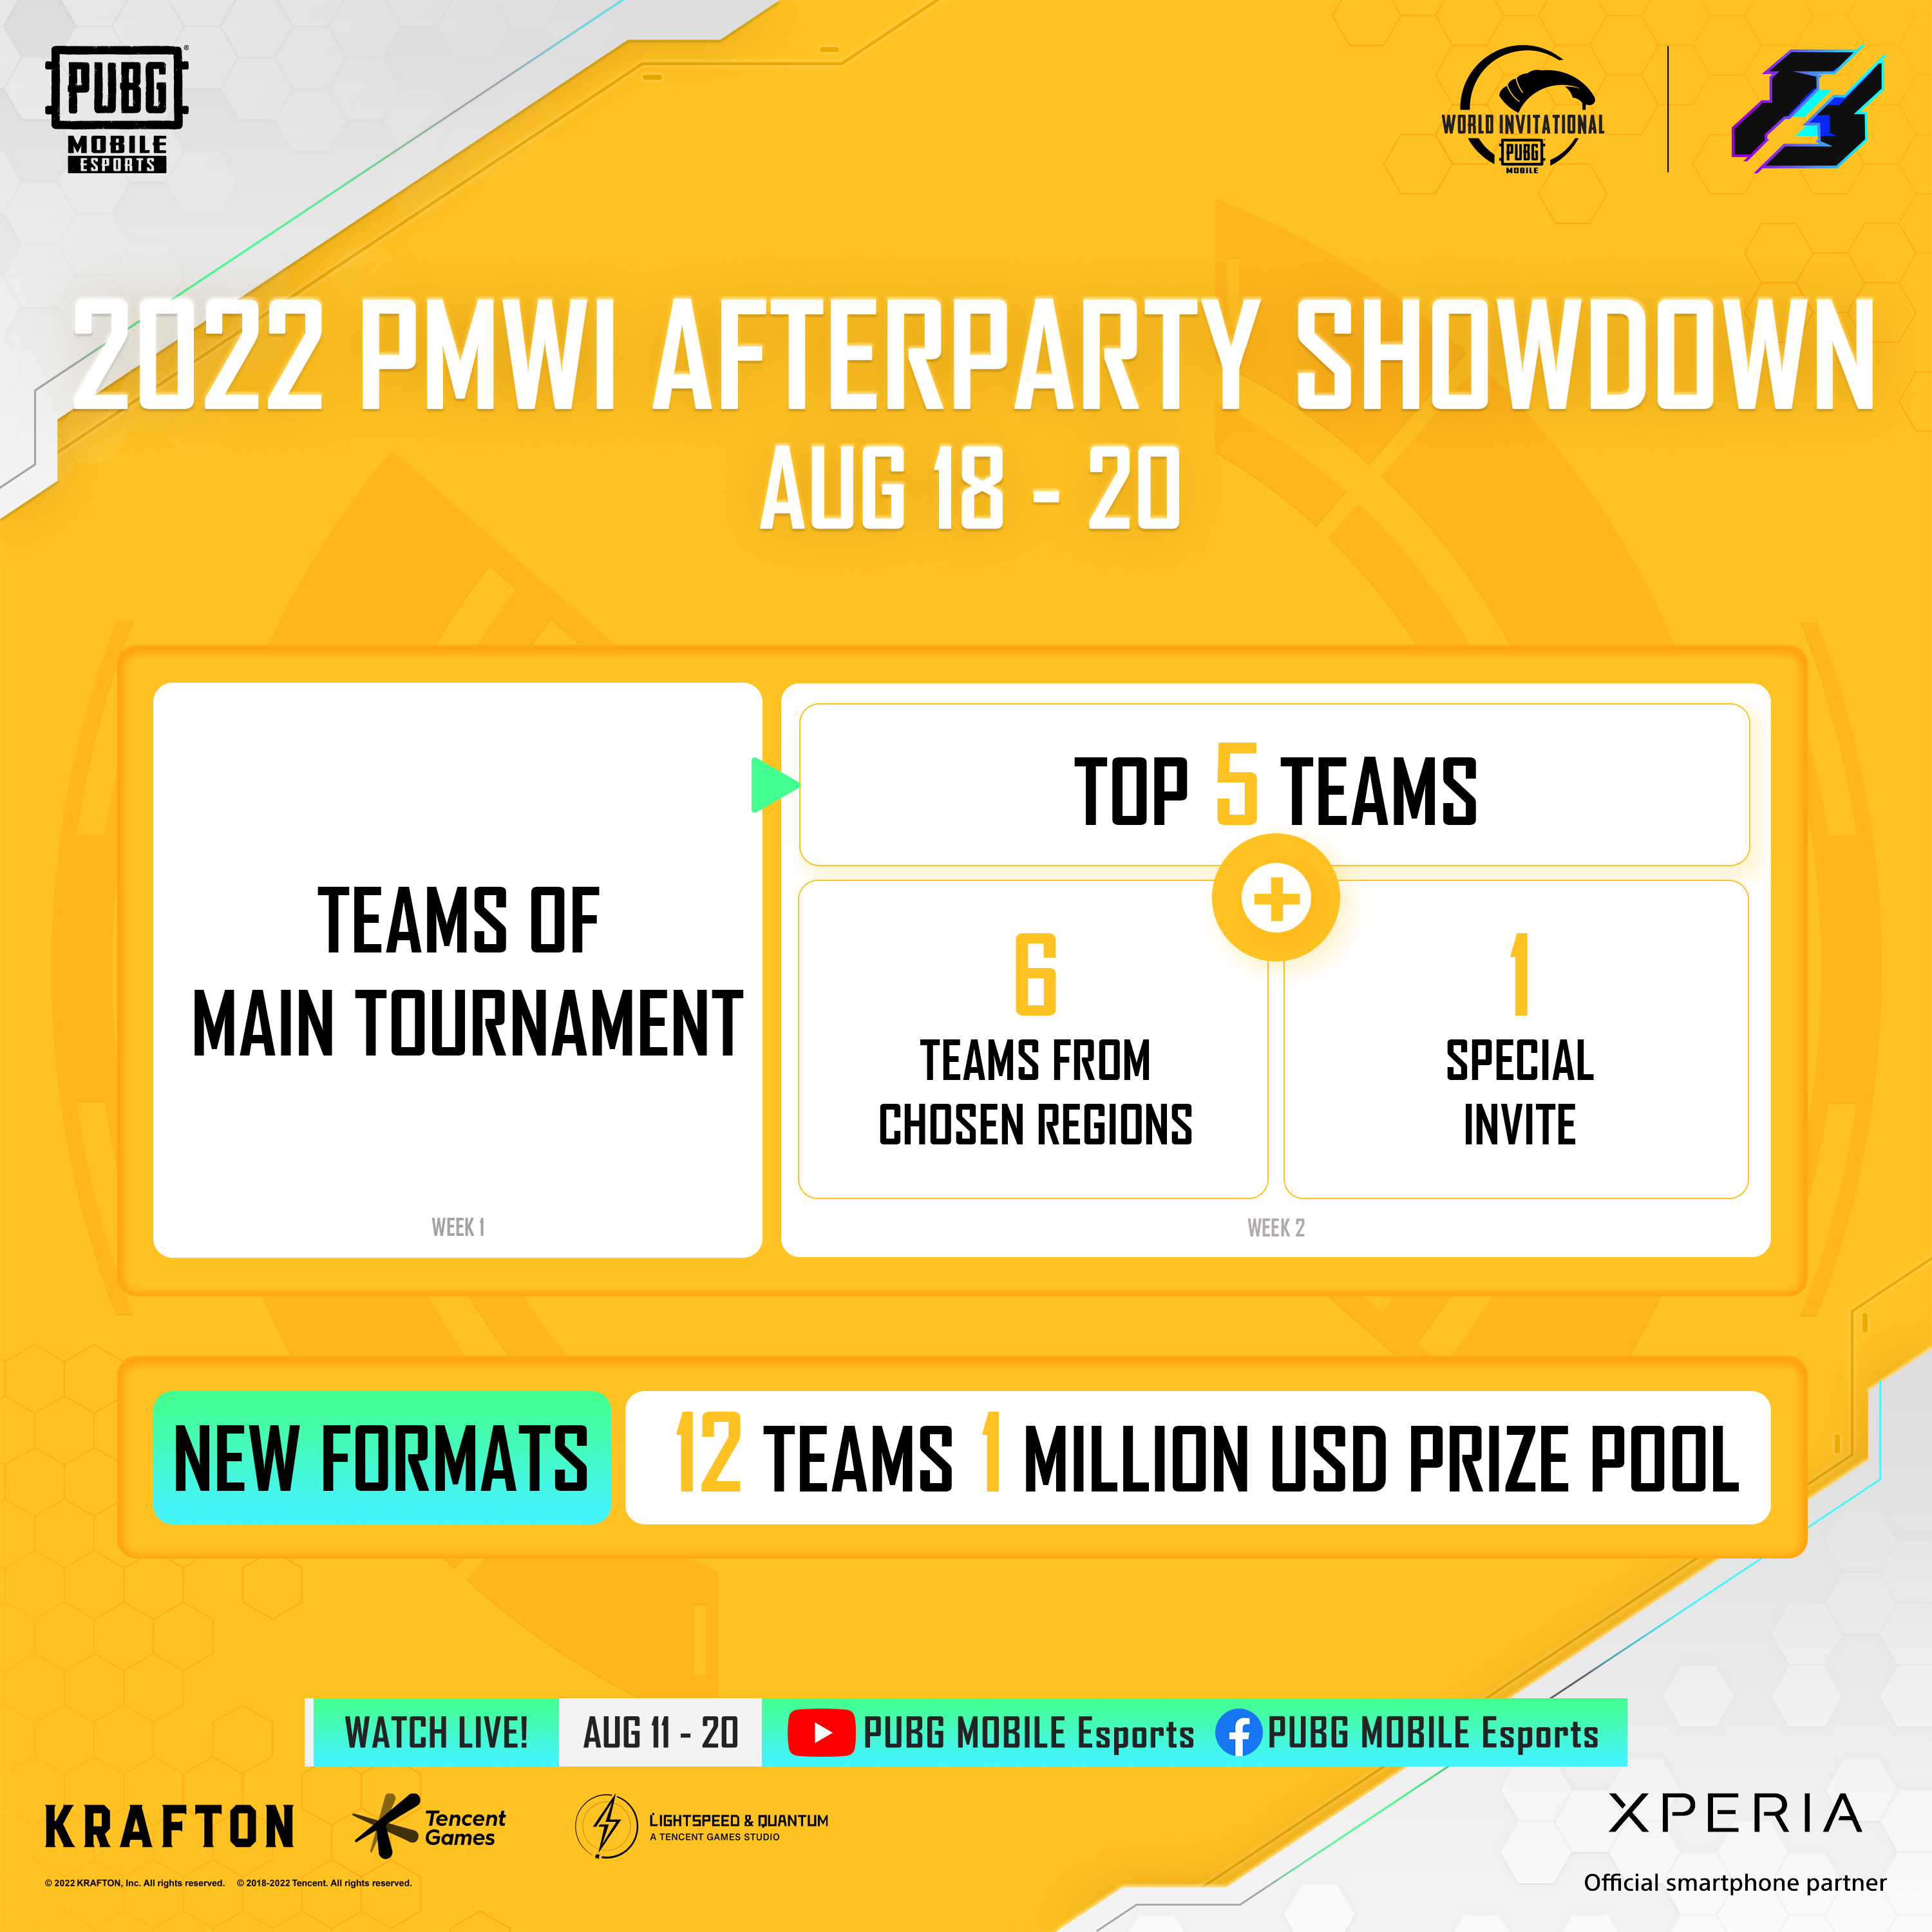 PMWI 2022 Afterparty Showdown: Prize pool distribution of PUBG Mobile World Invitational 2022 Afterparty Showdown